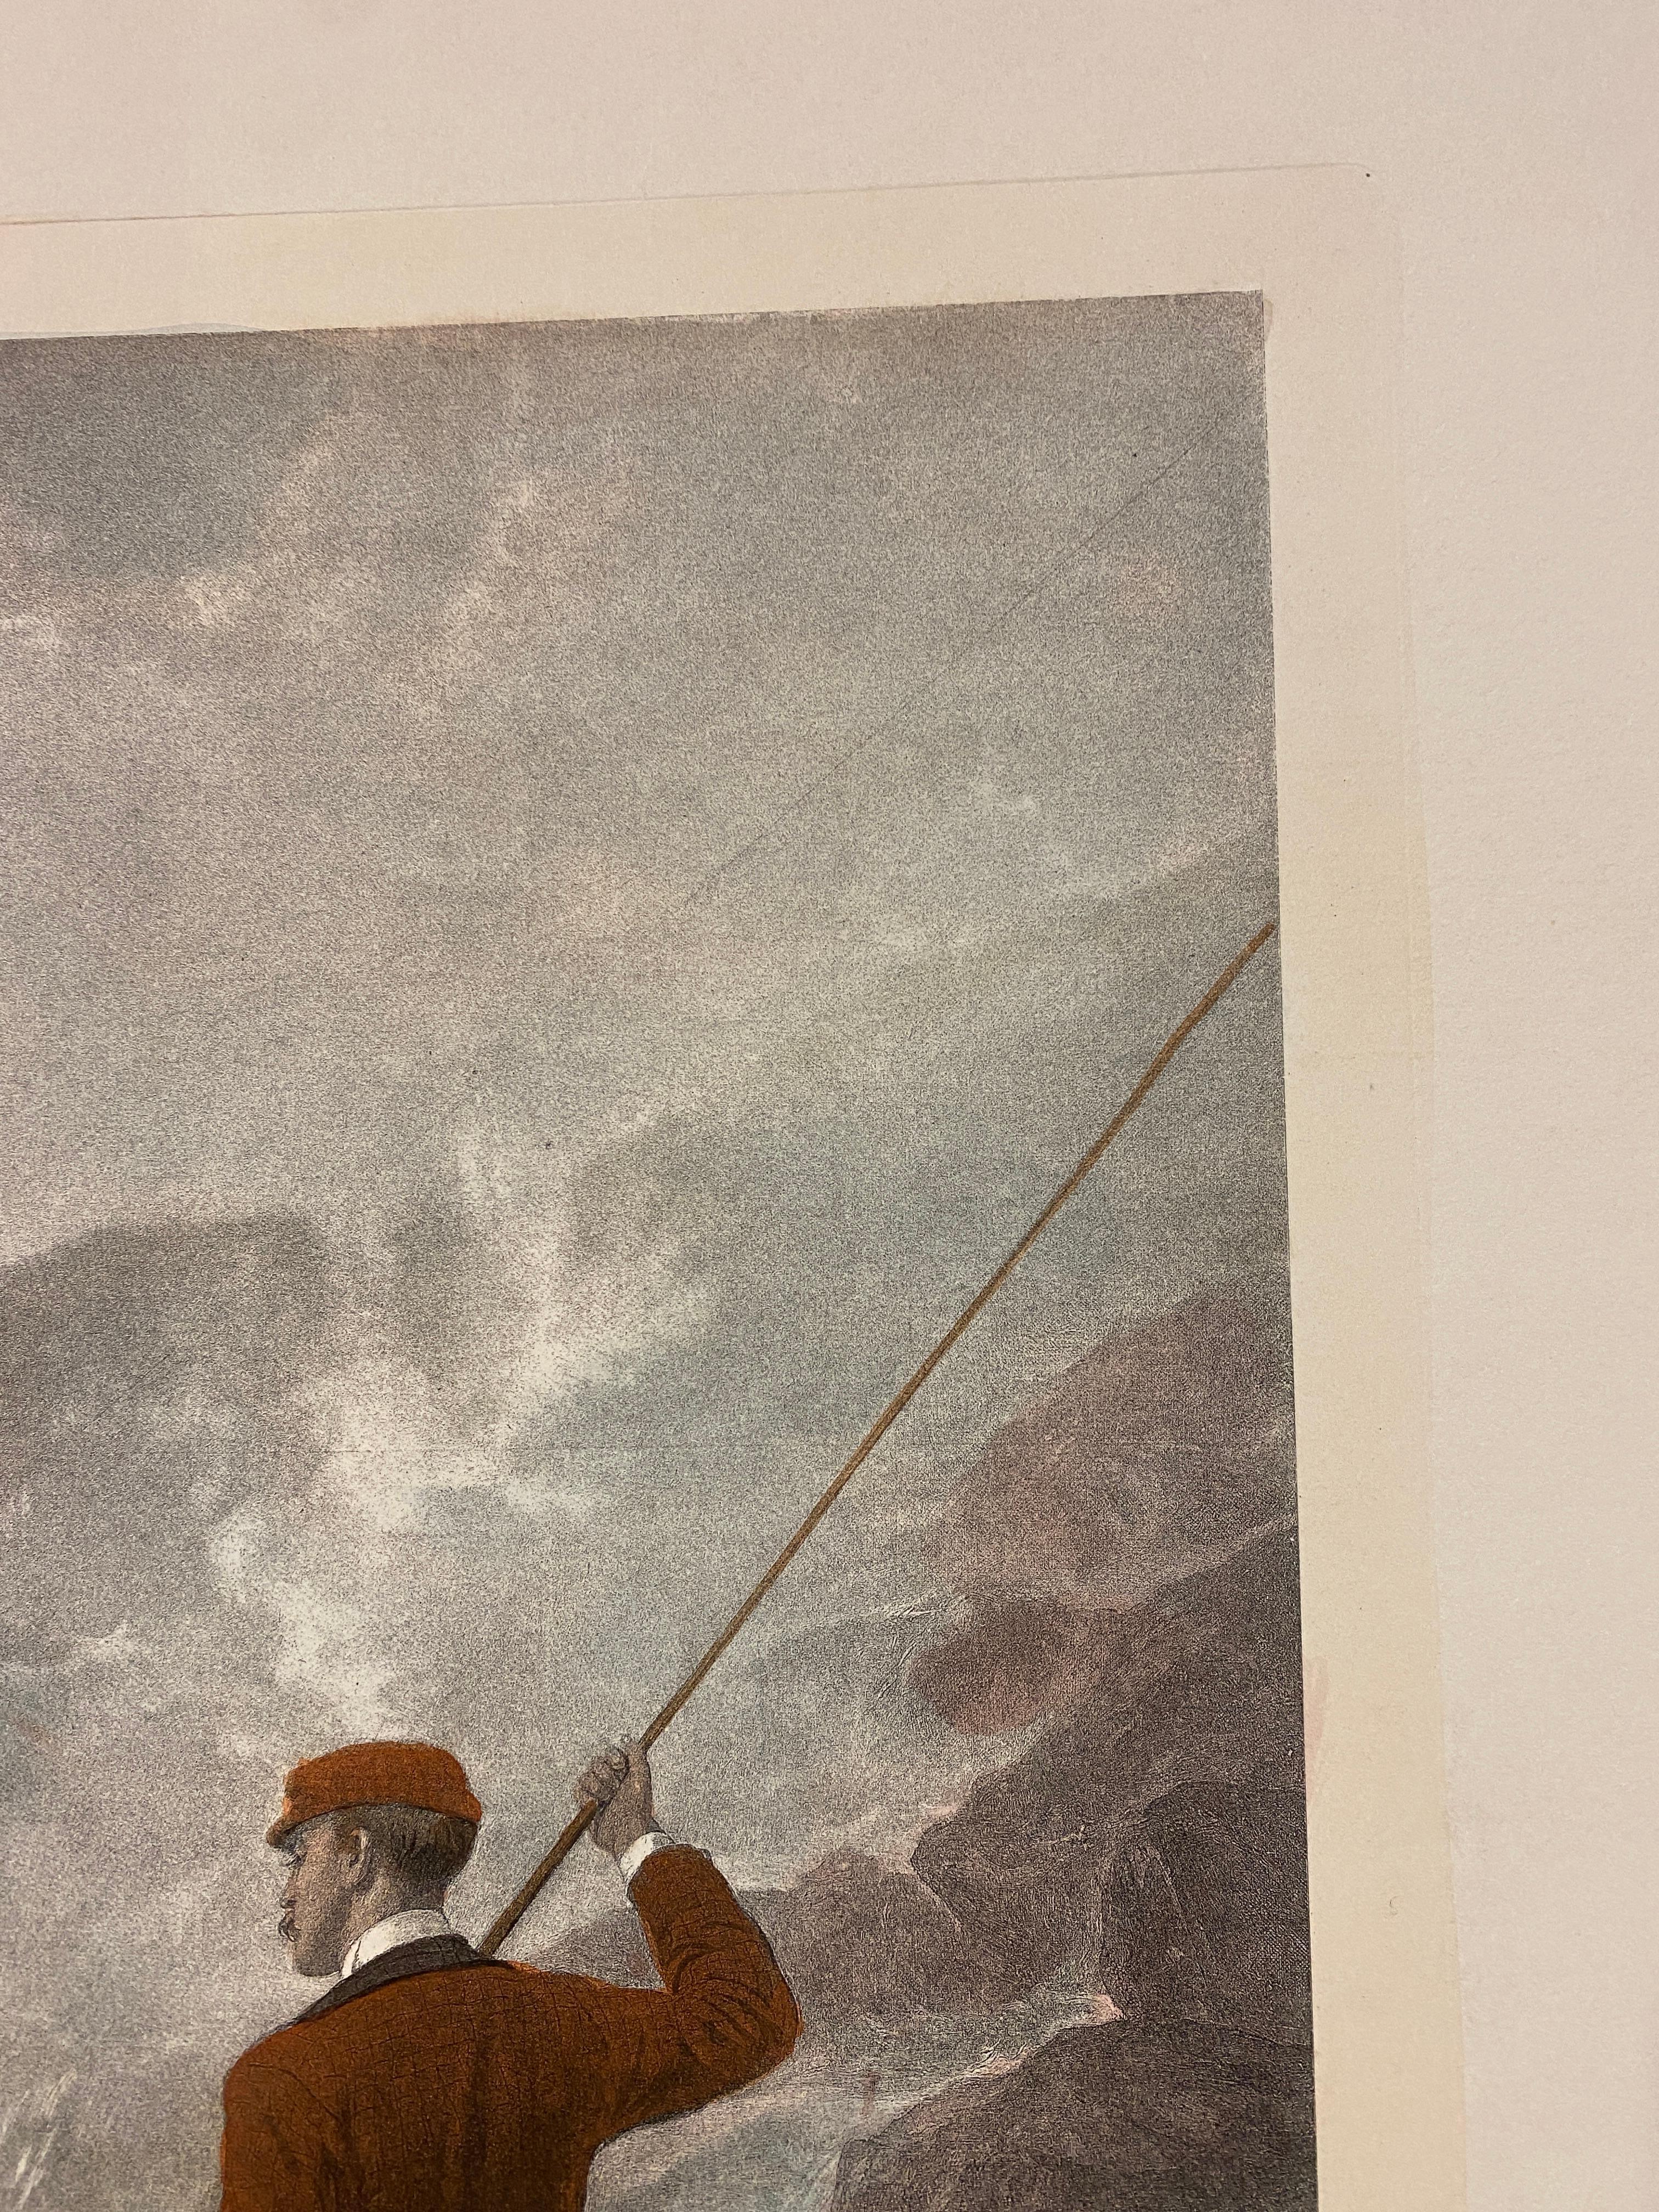 Italian Contemporary Hand Painted Landscape Print Fishing by George Earl 2 of 2 For Sale 5